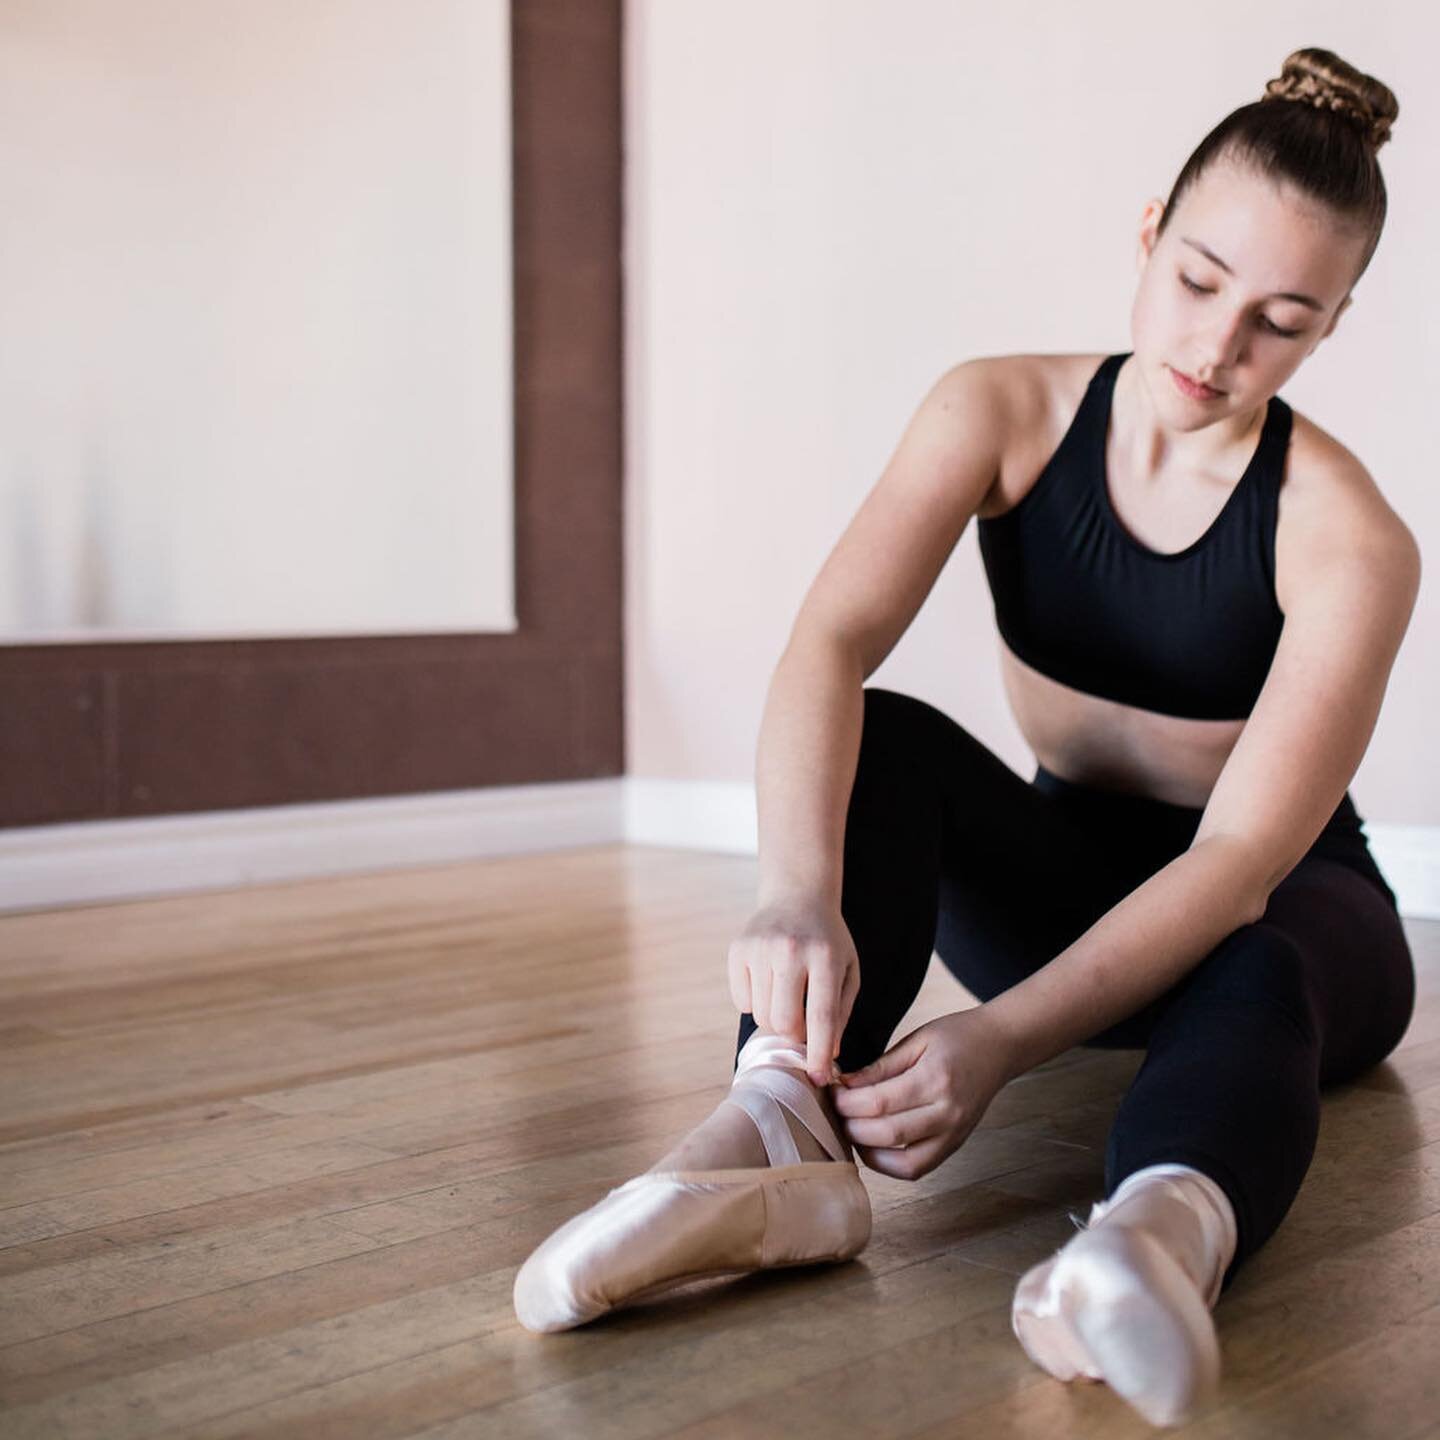 We know how important self-care is to dancers.
Our bodies need to be cared for after all of our hard work! We like to use natural products to absorb less toxins, keeping us fresh and ready for our next class!

Did you know we partnered with @soapston